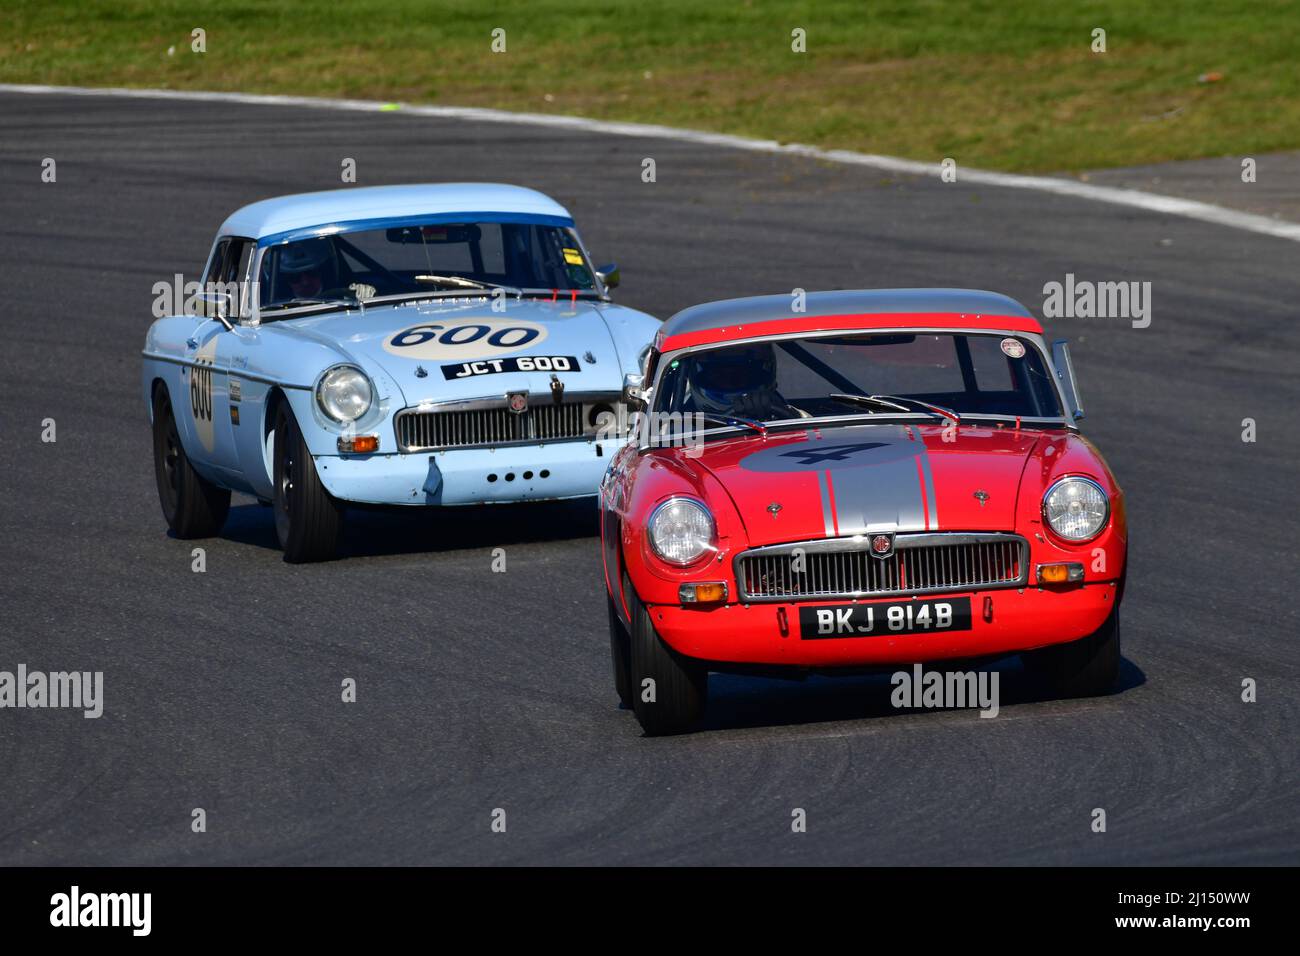 A pair of racing B's, Stephen Winter, MG B Roadster, John Tordoff, MG B Roadster, Equipe Libre,  a 40 minute one or two driver race for pre-1966 race Stock Photo